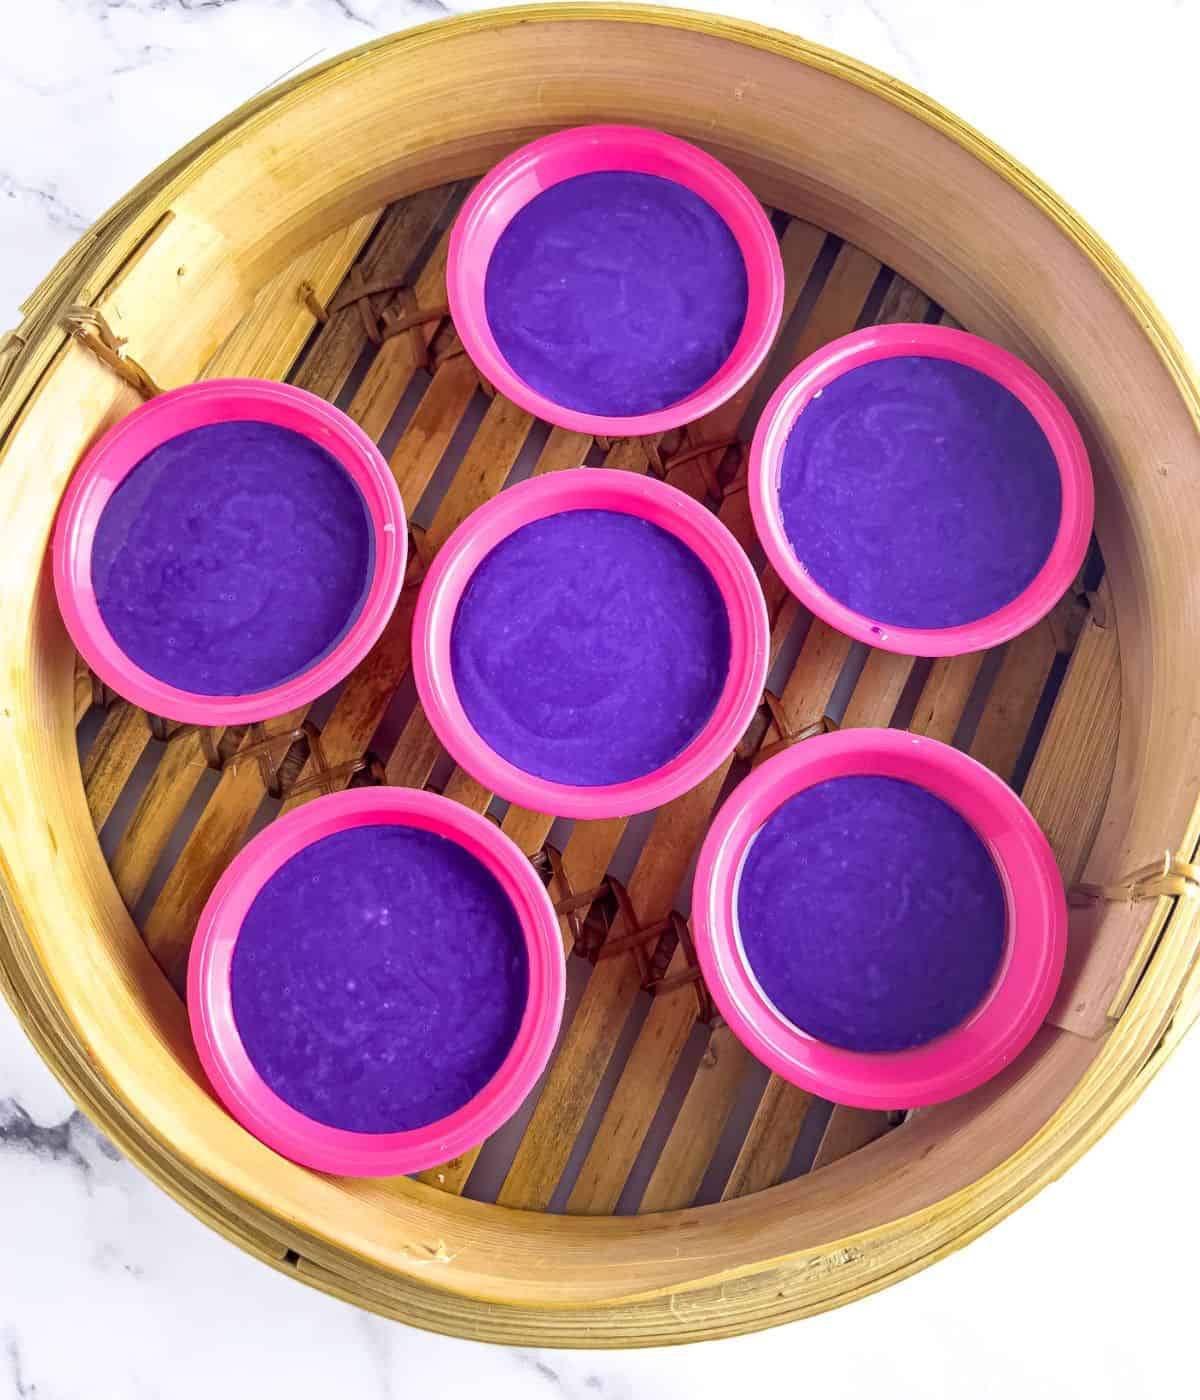 Ube puto mixture in a bamboo steamer.